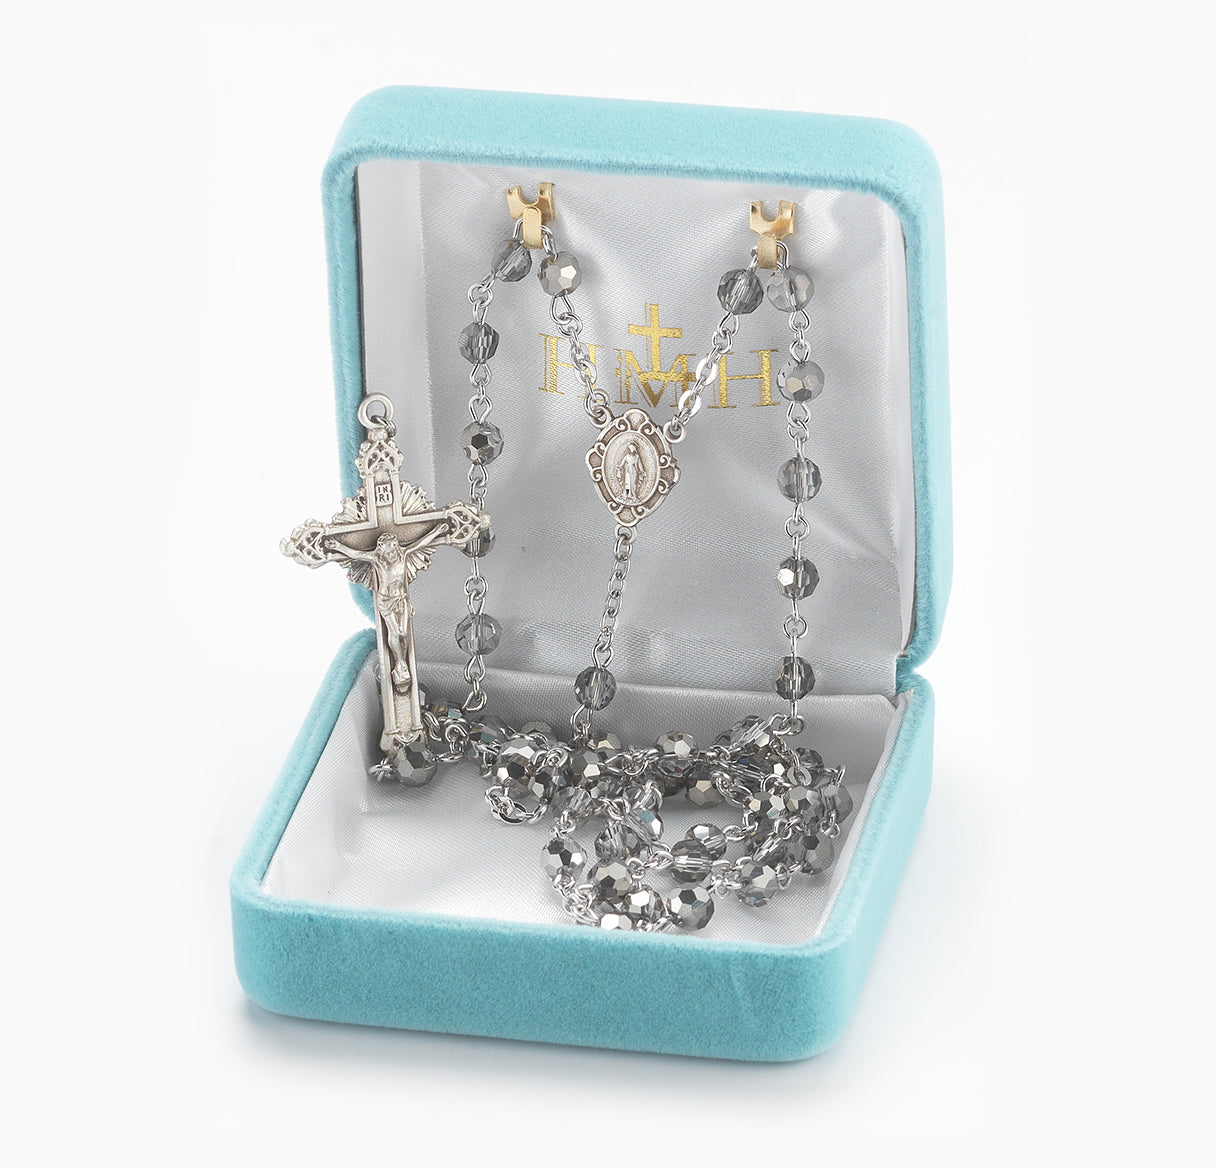 Round Metallic Silver Bead Rosary Sterling Crucifix and Centerpiece